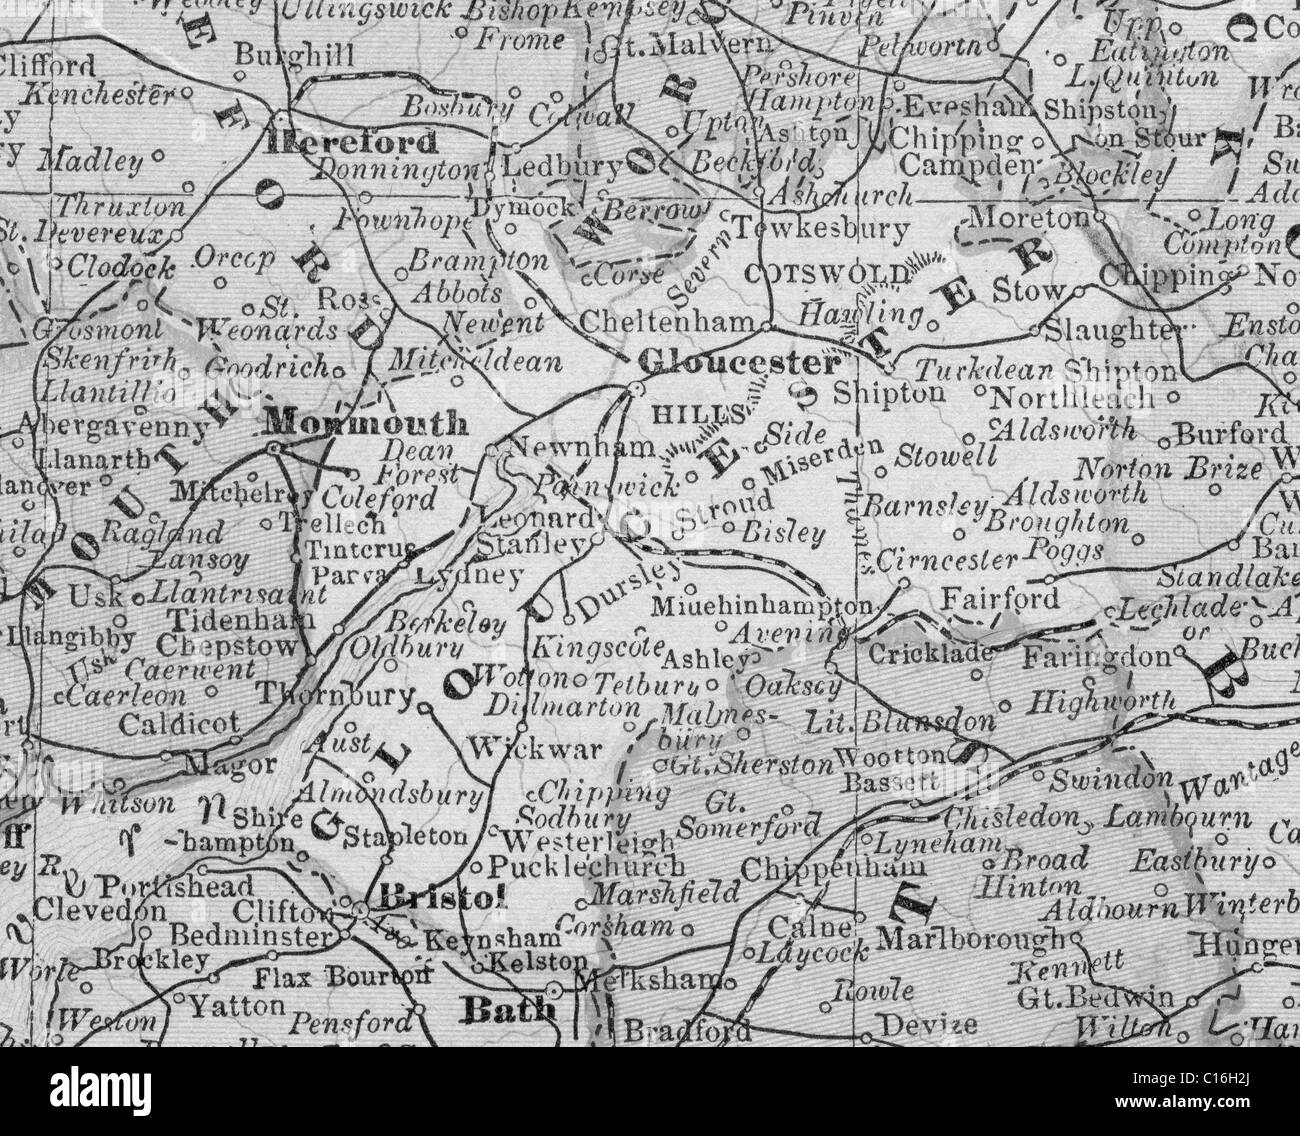 Old map of Gloucester County from original geography textbook, 1884 Stock Photo